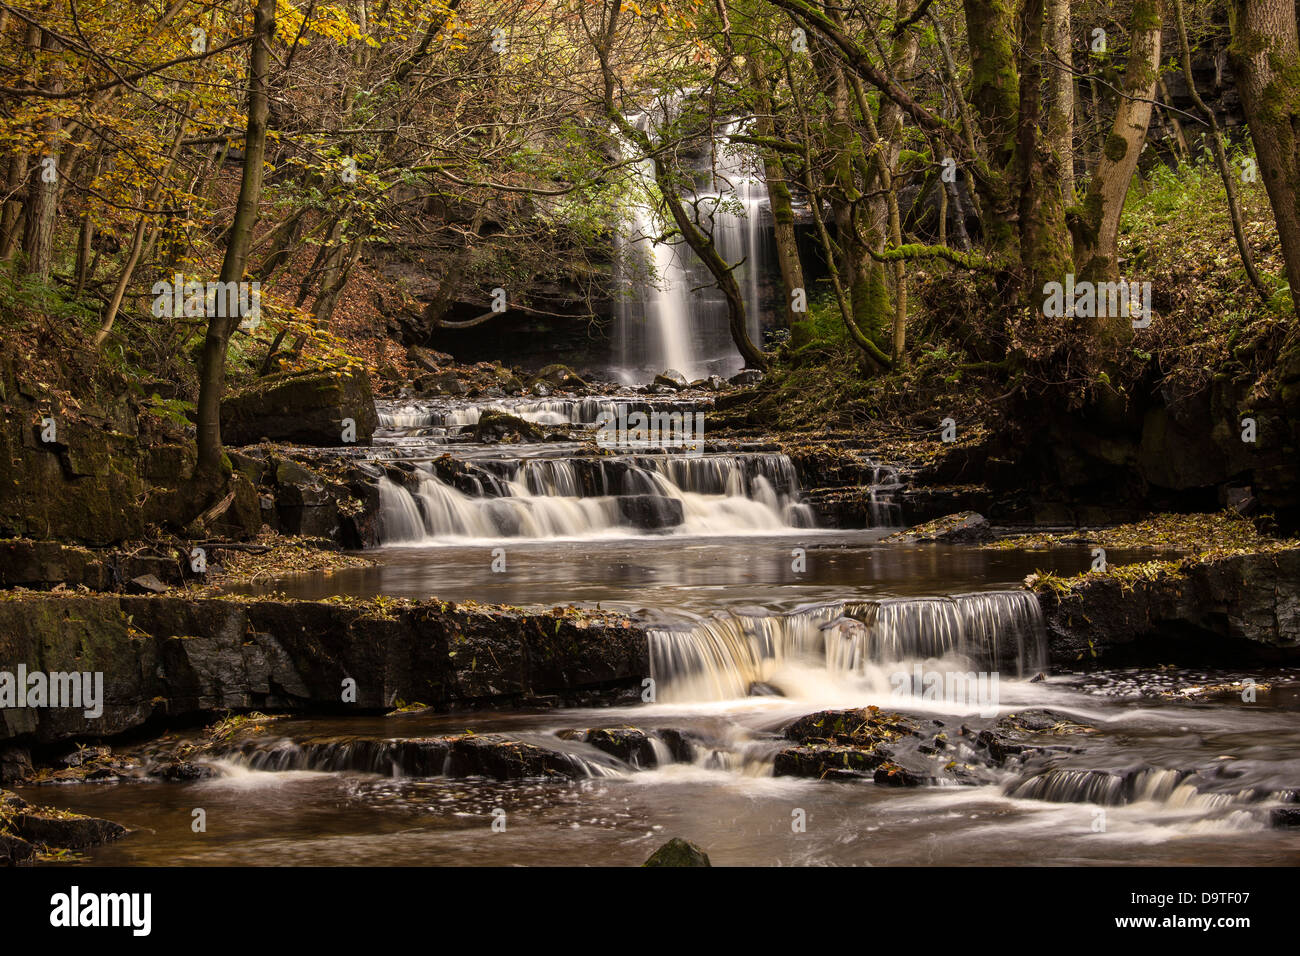 Gibsons Grotta Cascata, Bowlees, Teesdale, County Durham Foto Stock